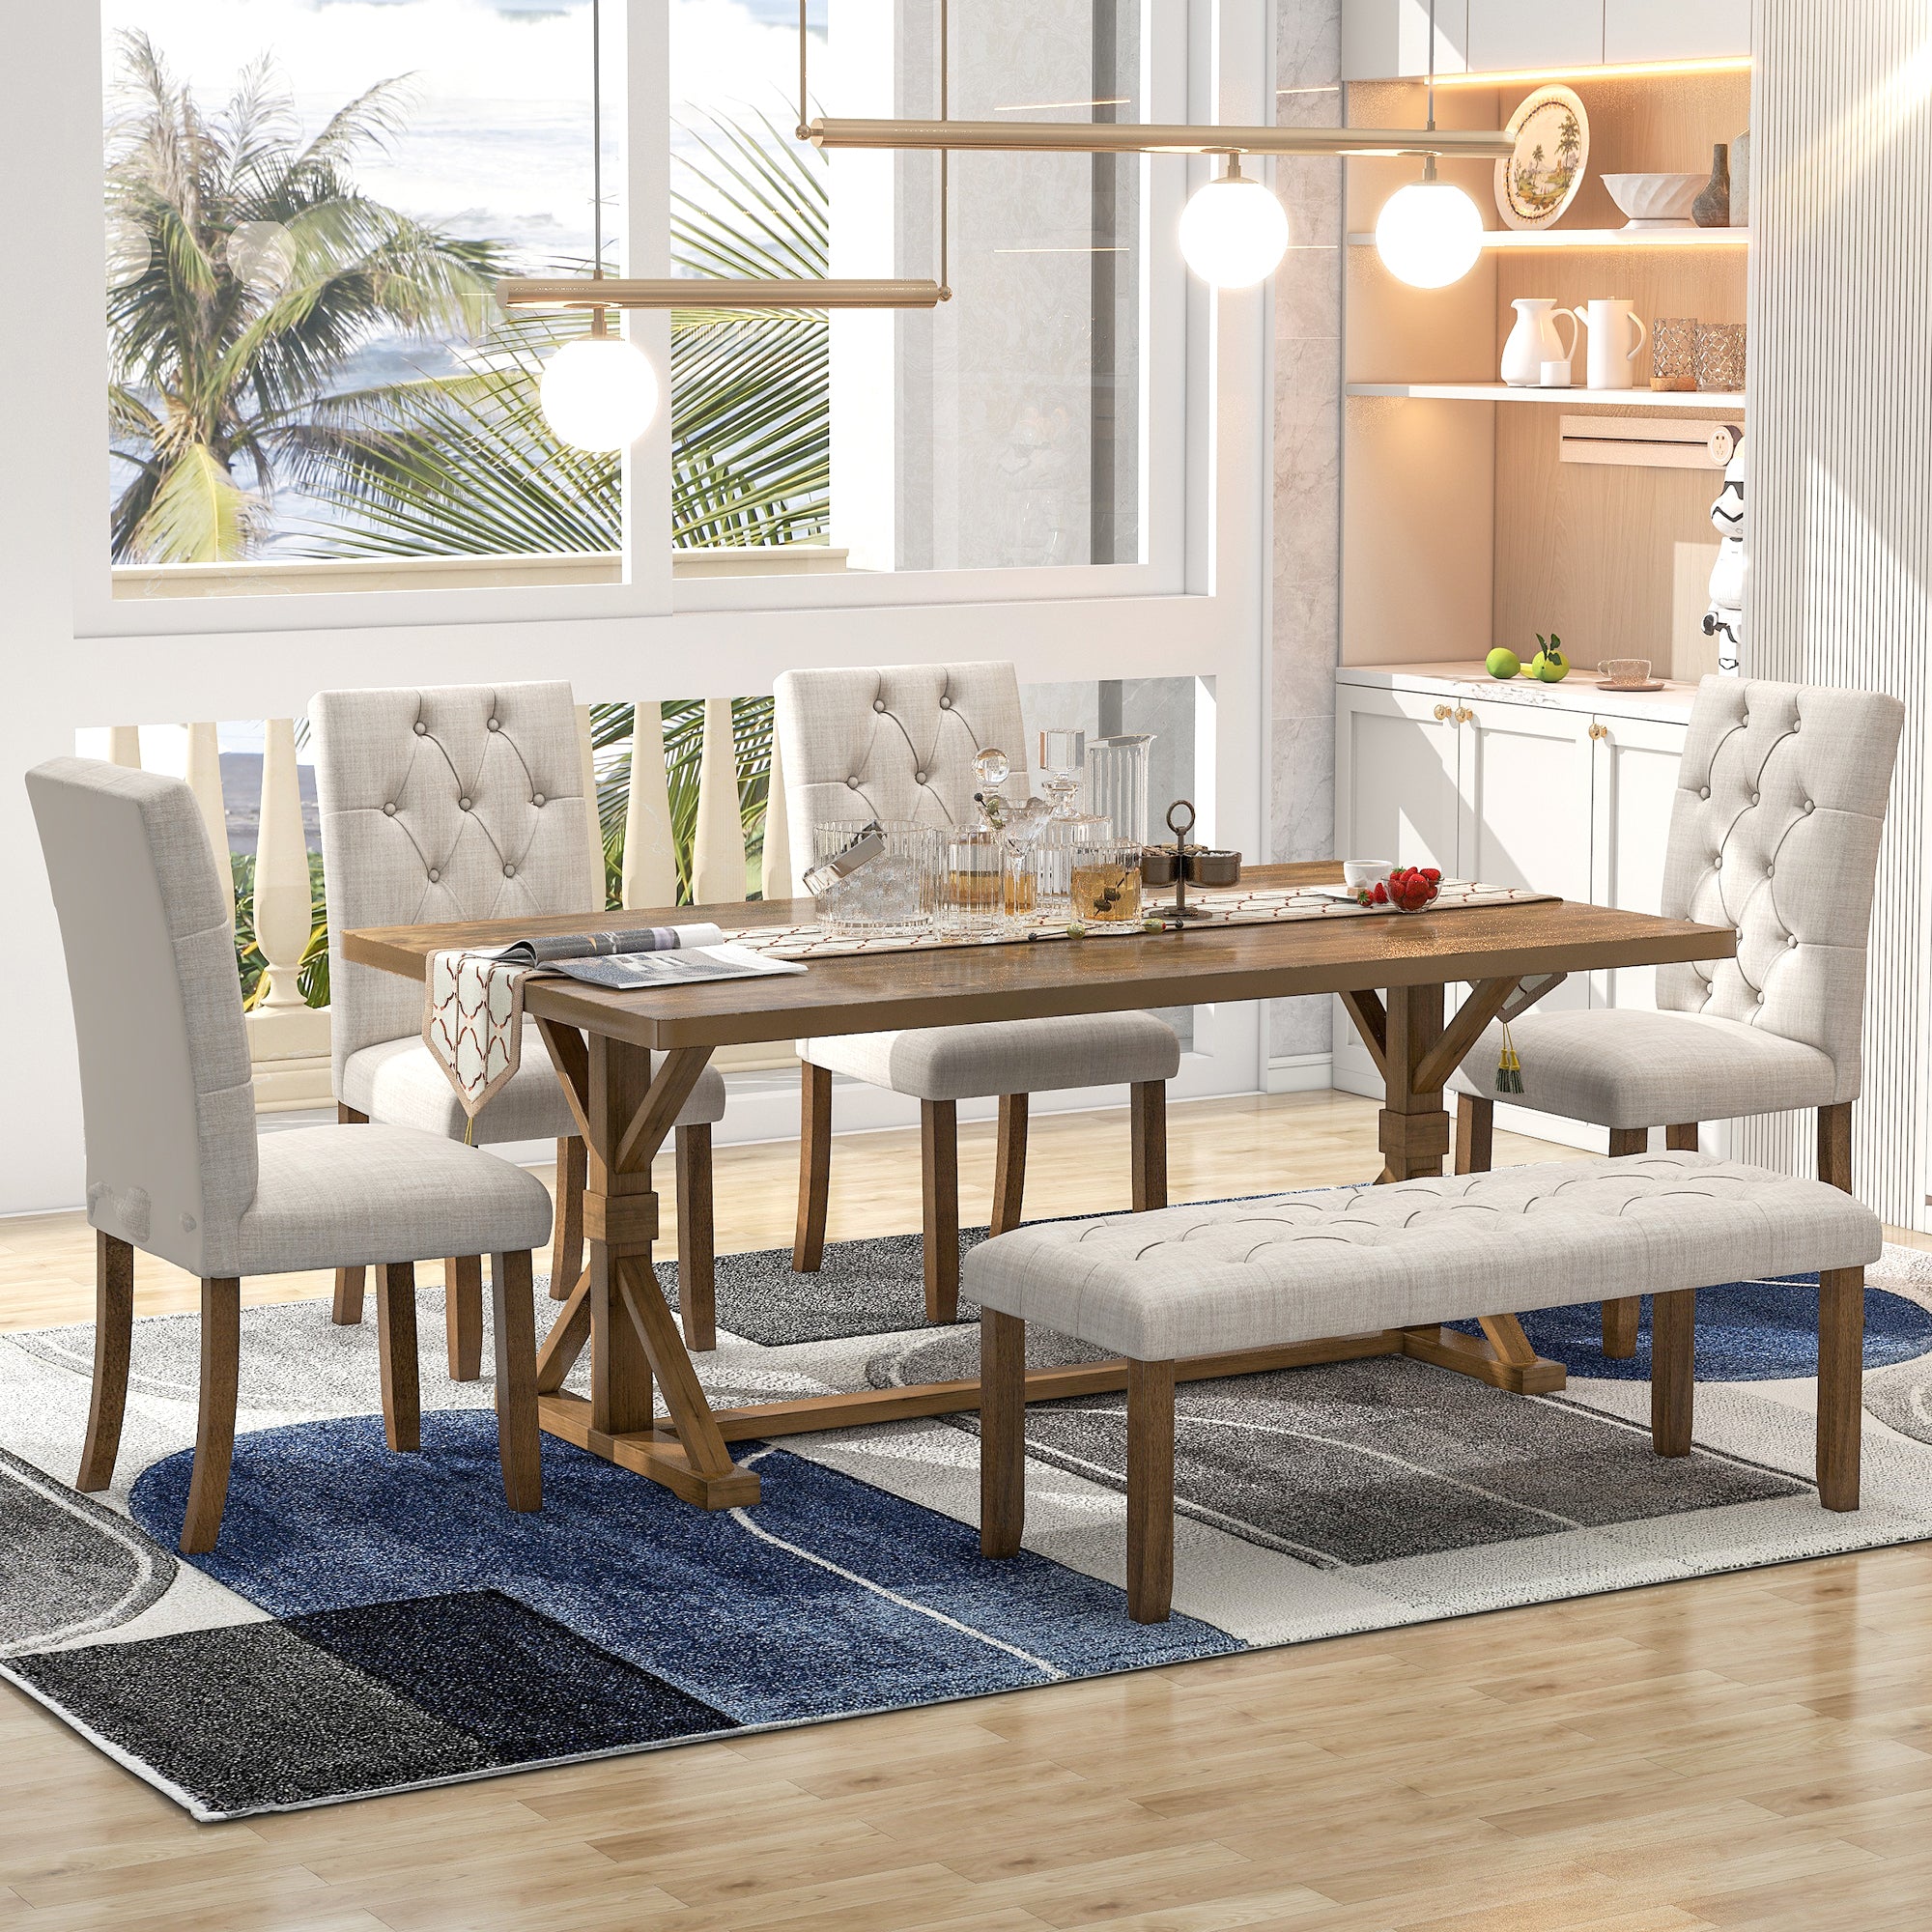 6-Piece Farmhouse Dining Set - 72" Rectangular Wood Table, 4 Upholstered Chairs with Bench (Walnut)